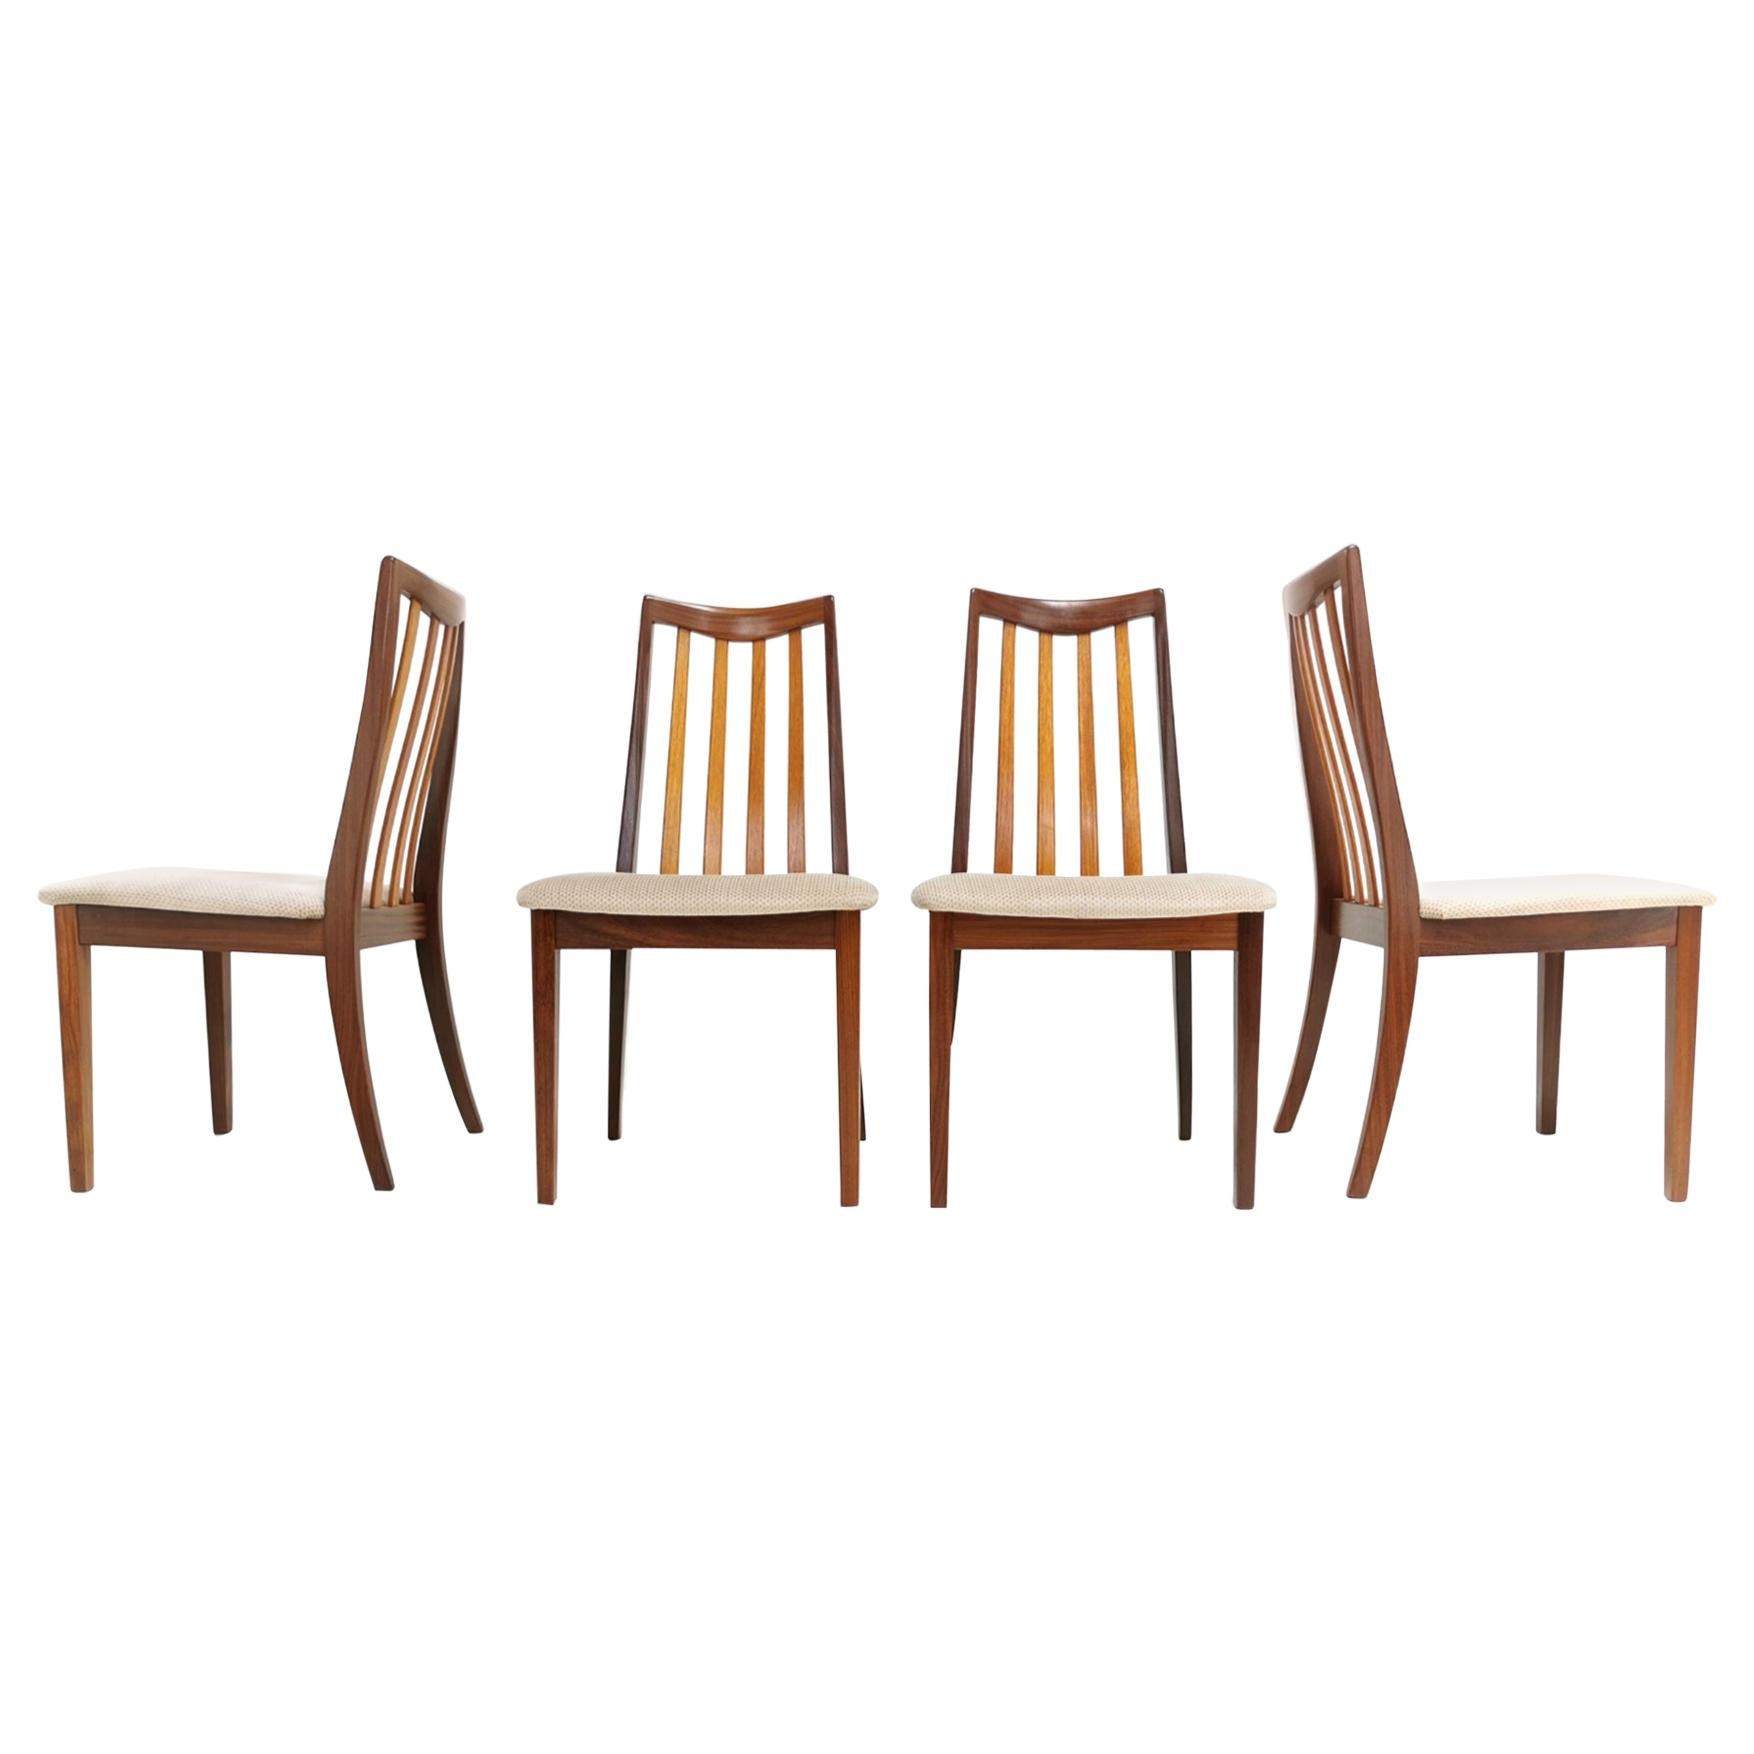 Vintage Teak Dining Chairs by Leslie Dandy for G-Plan, 1960s, Set of 4